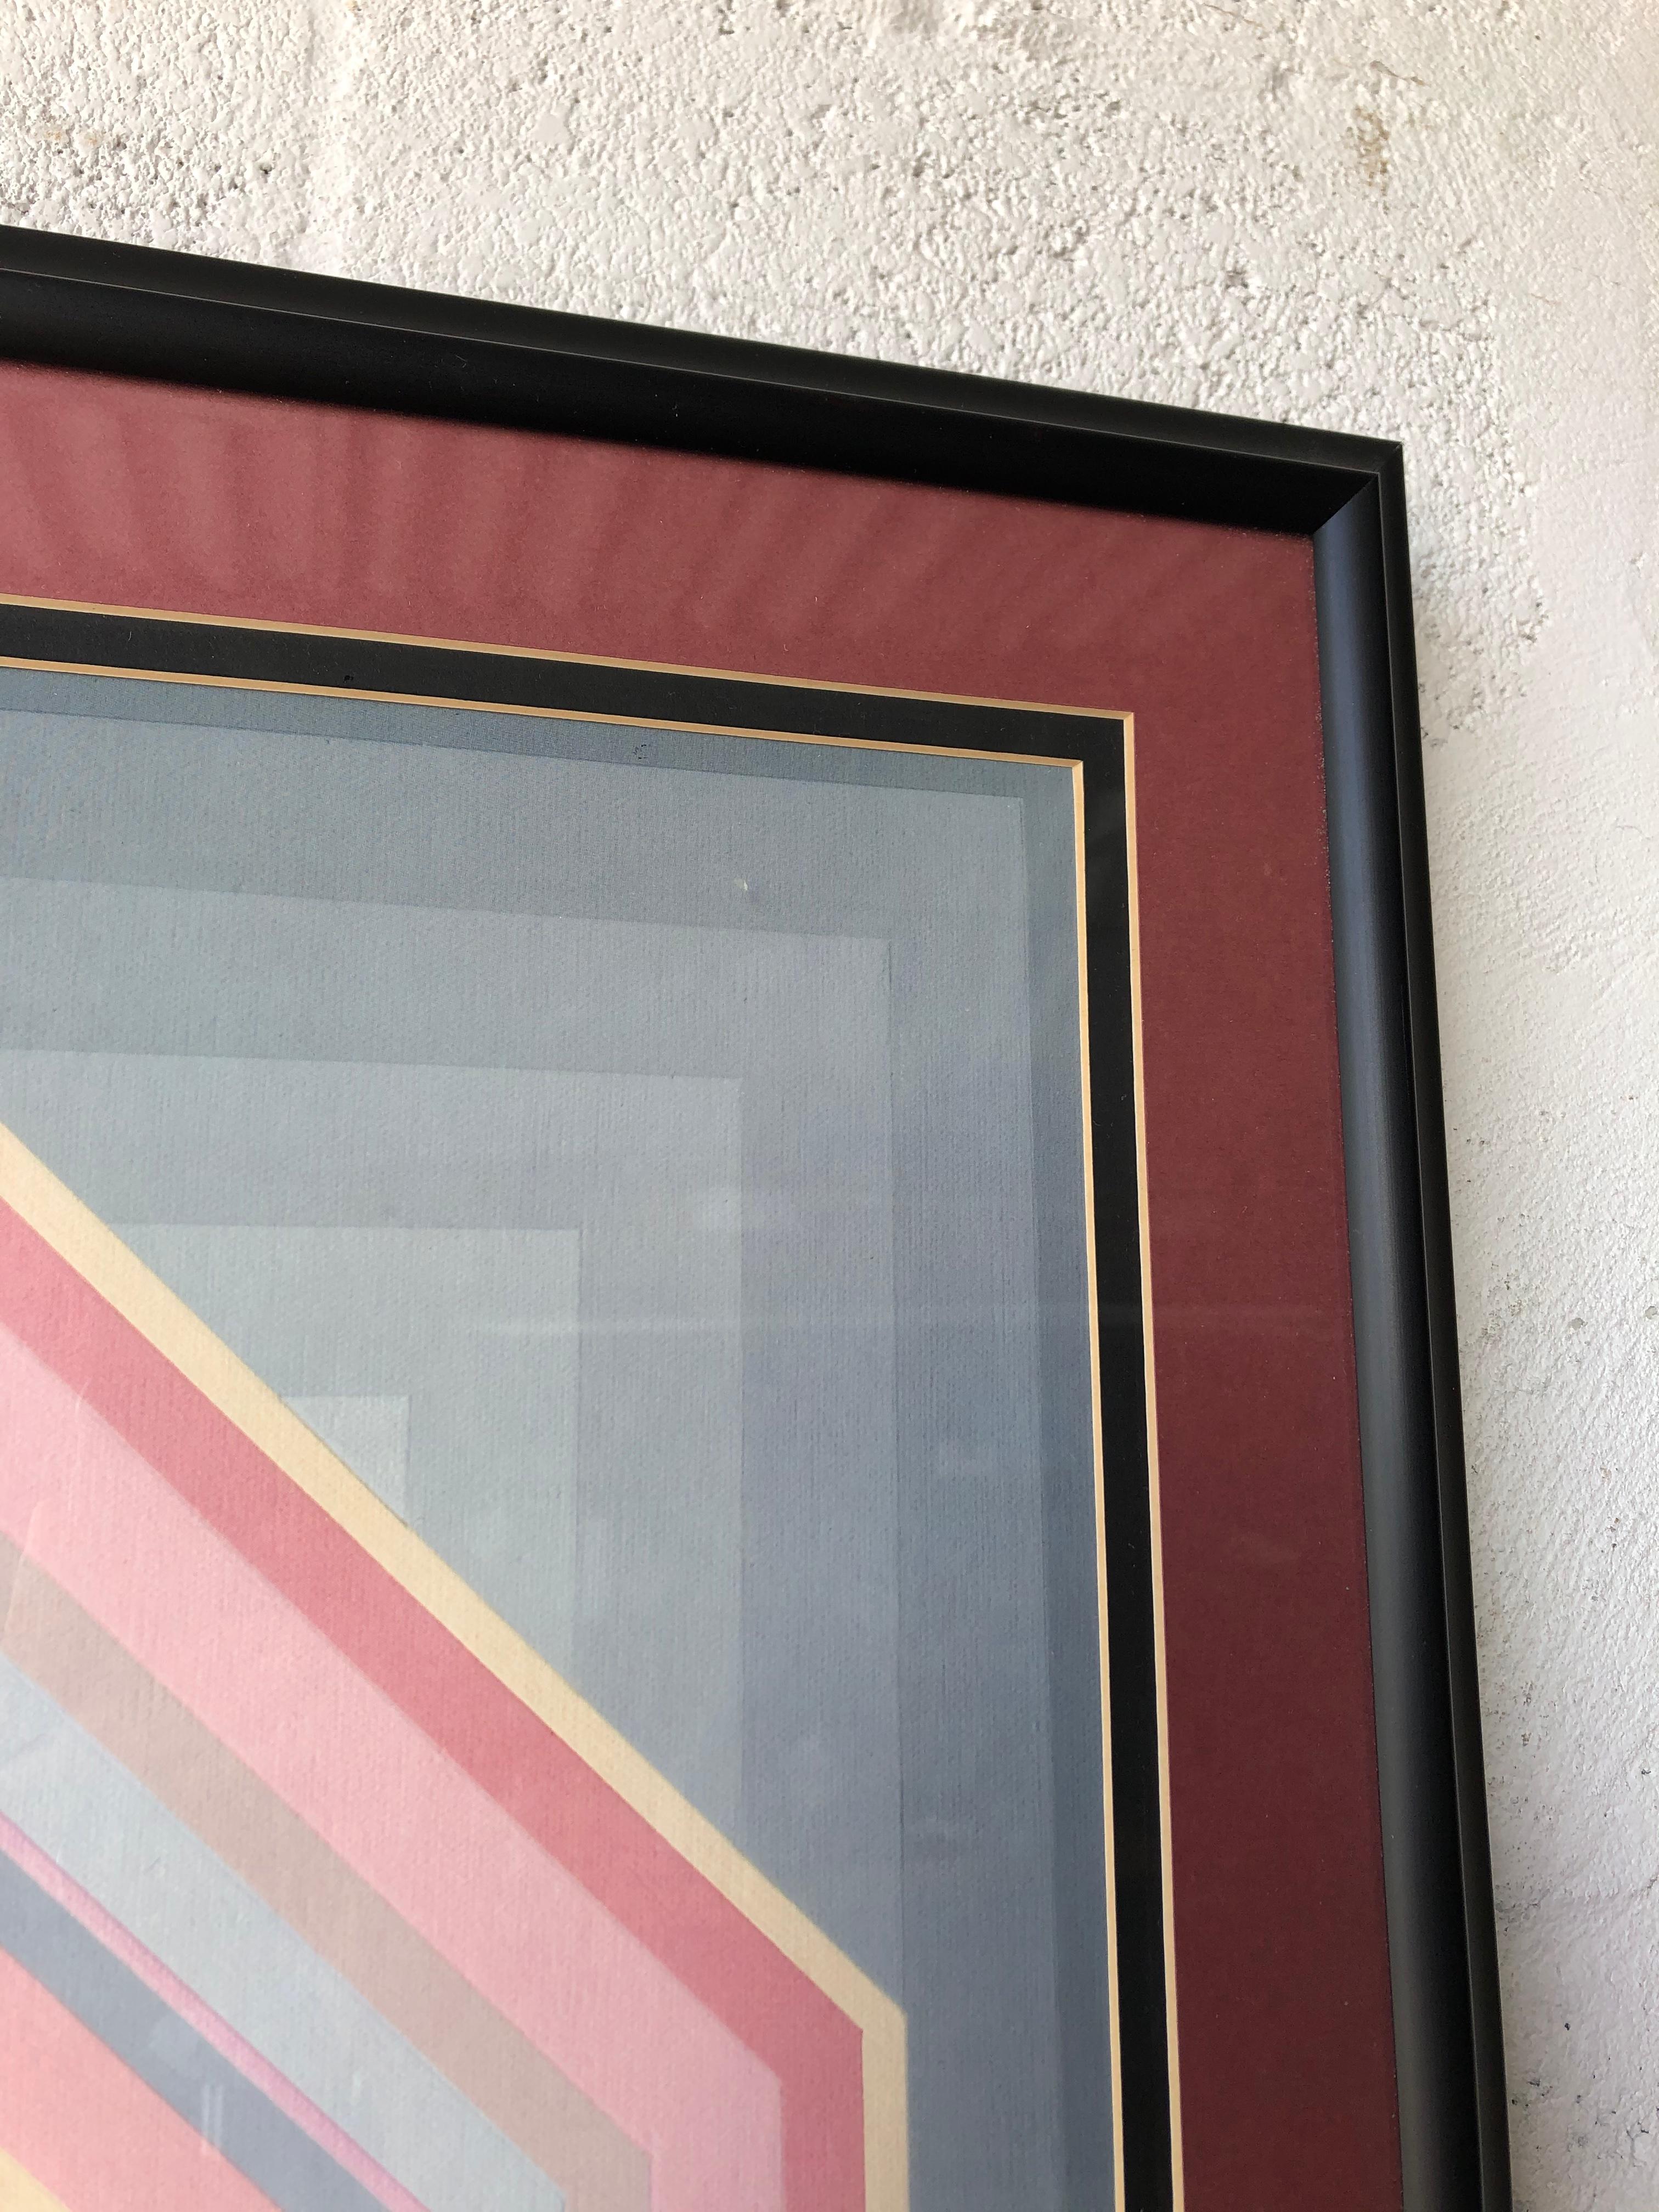 Framed Geometric Op Art Lithograph in the Richard Anuszkiewicz's Style. C 1980s For Sale 1